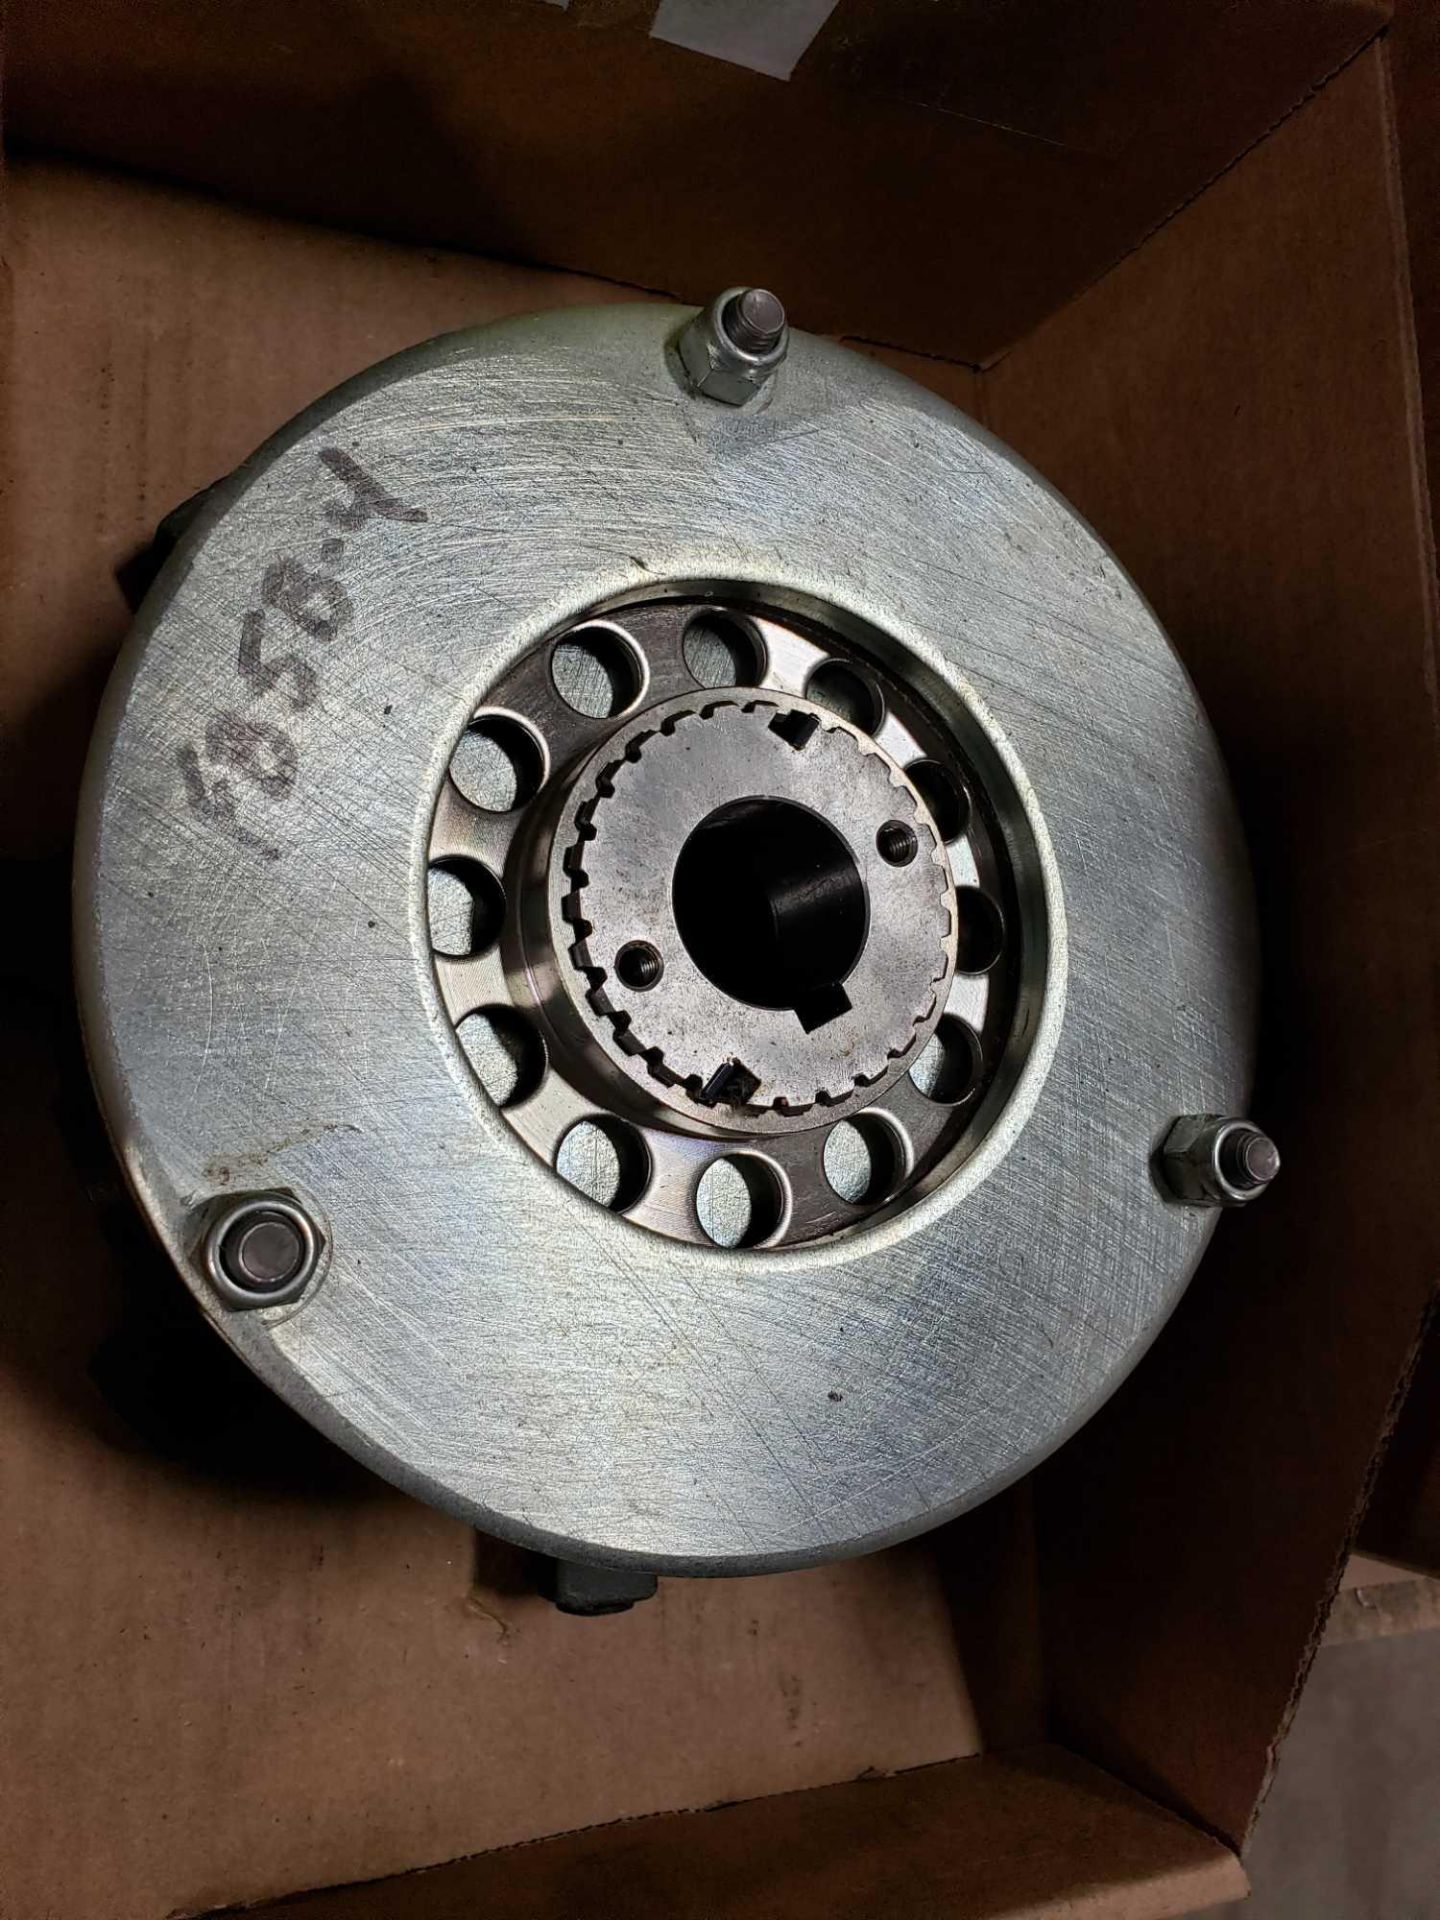 FB5B-4 clutch brake. Appears unused as pictured. - Image 3 of 3